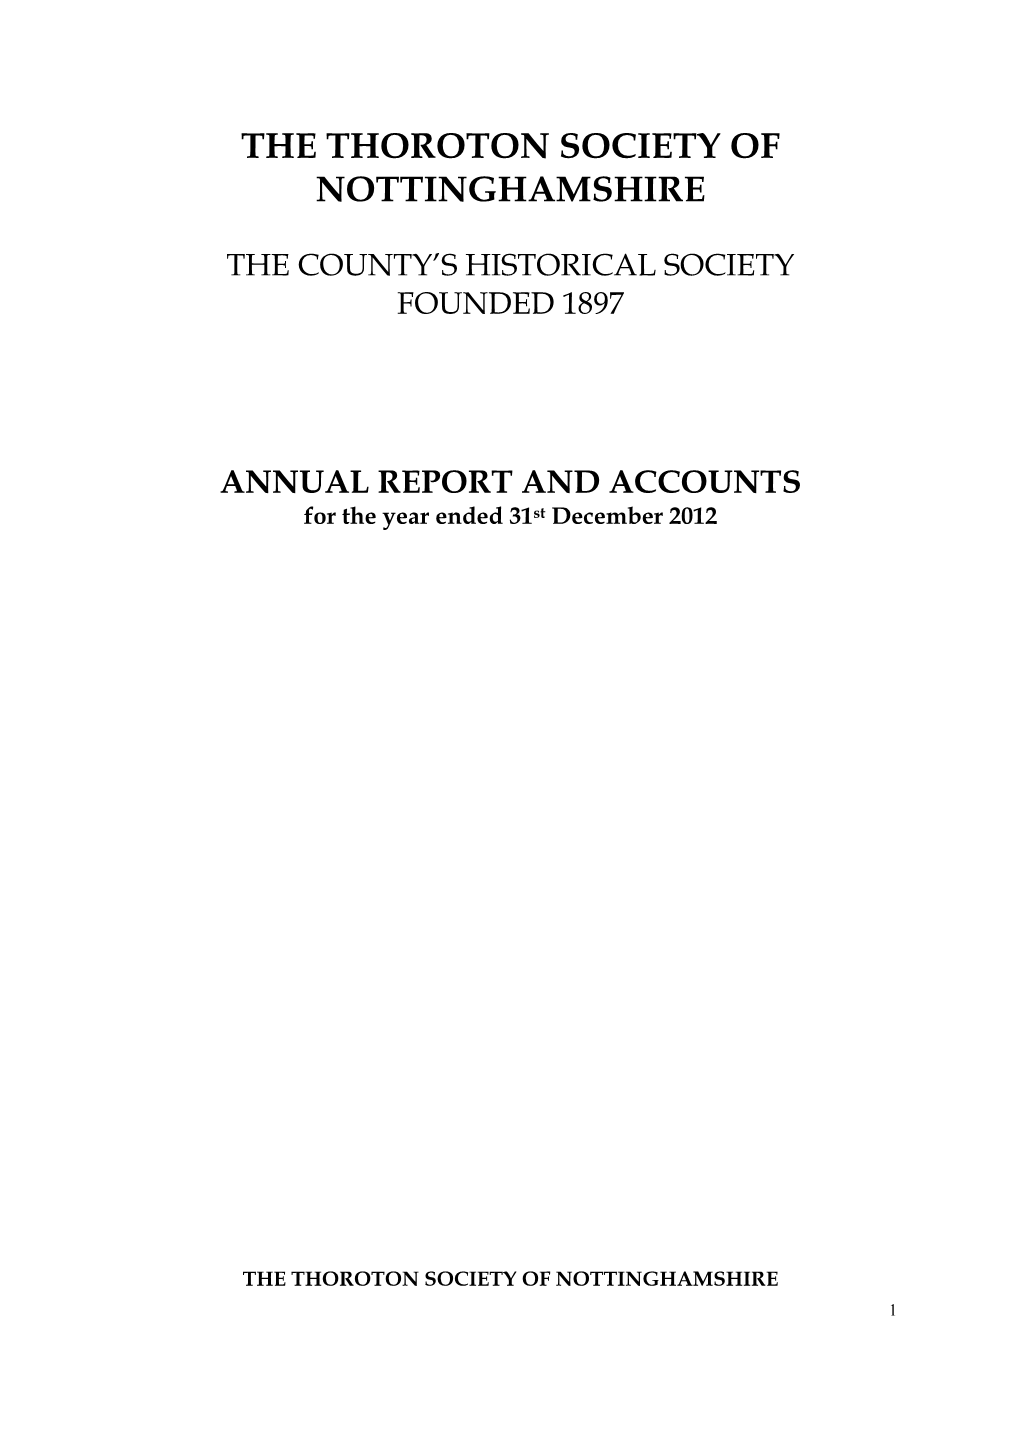 Annual Report for the Year Ended 31St December 2012